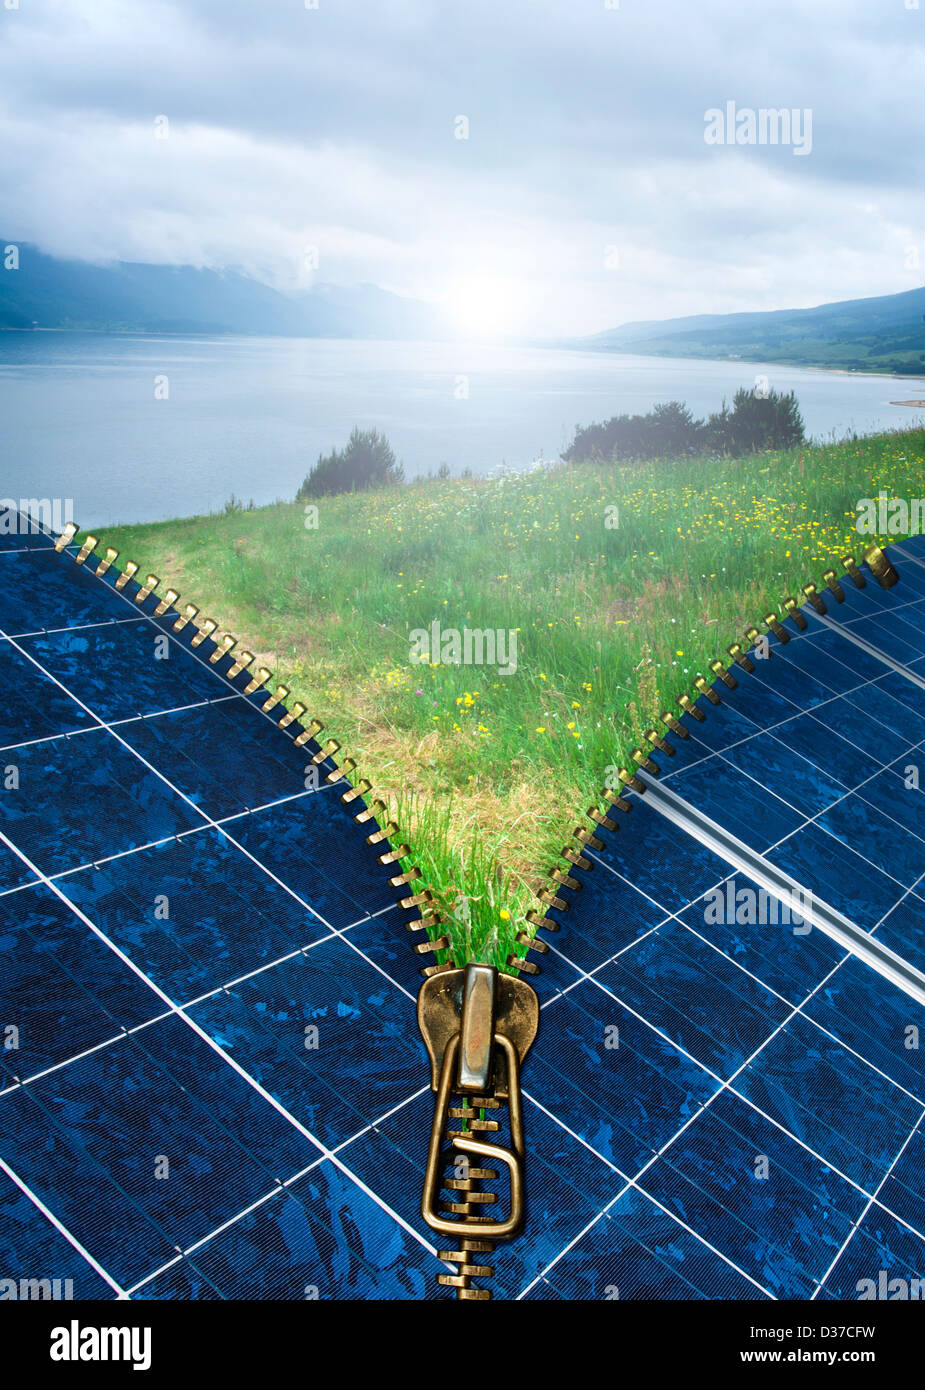 Ecology conception with zipper and solar panels. Nature landscape Stock Photo